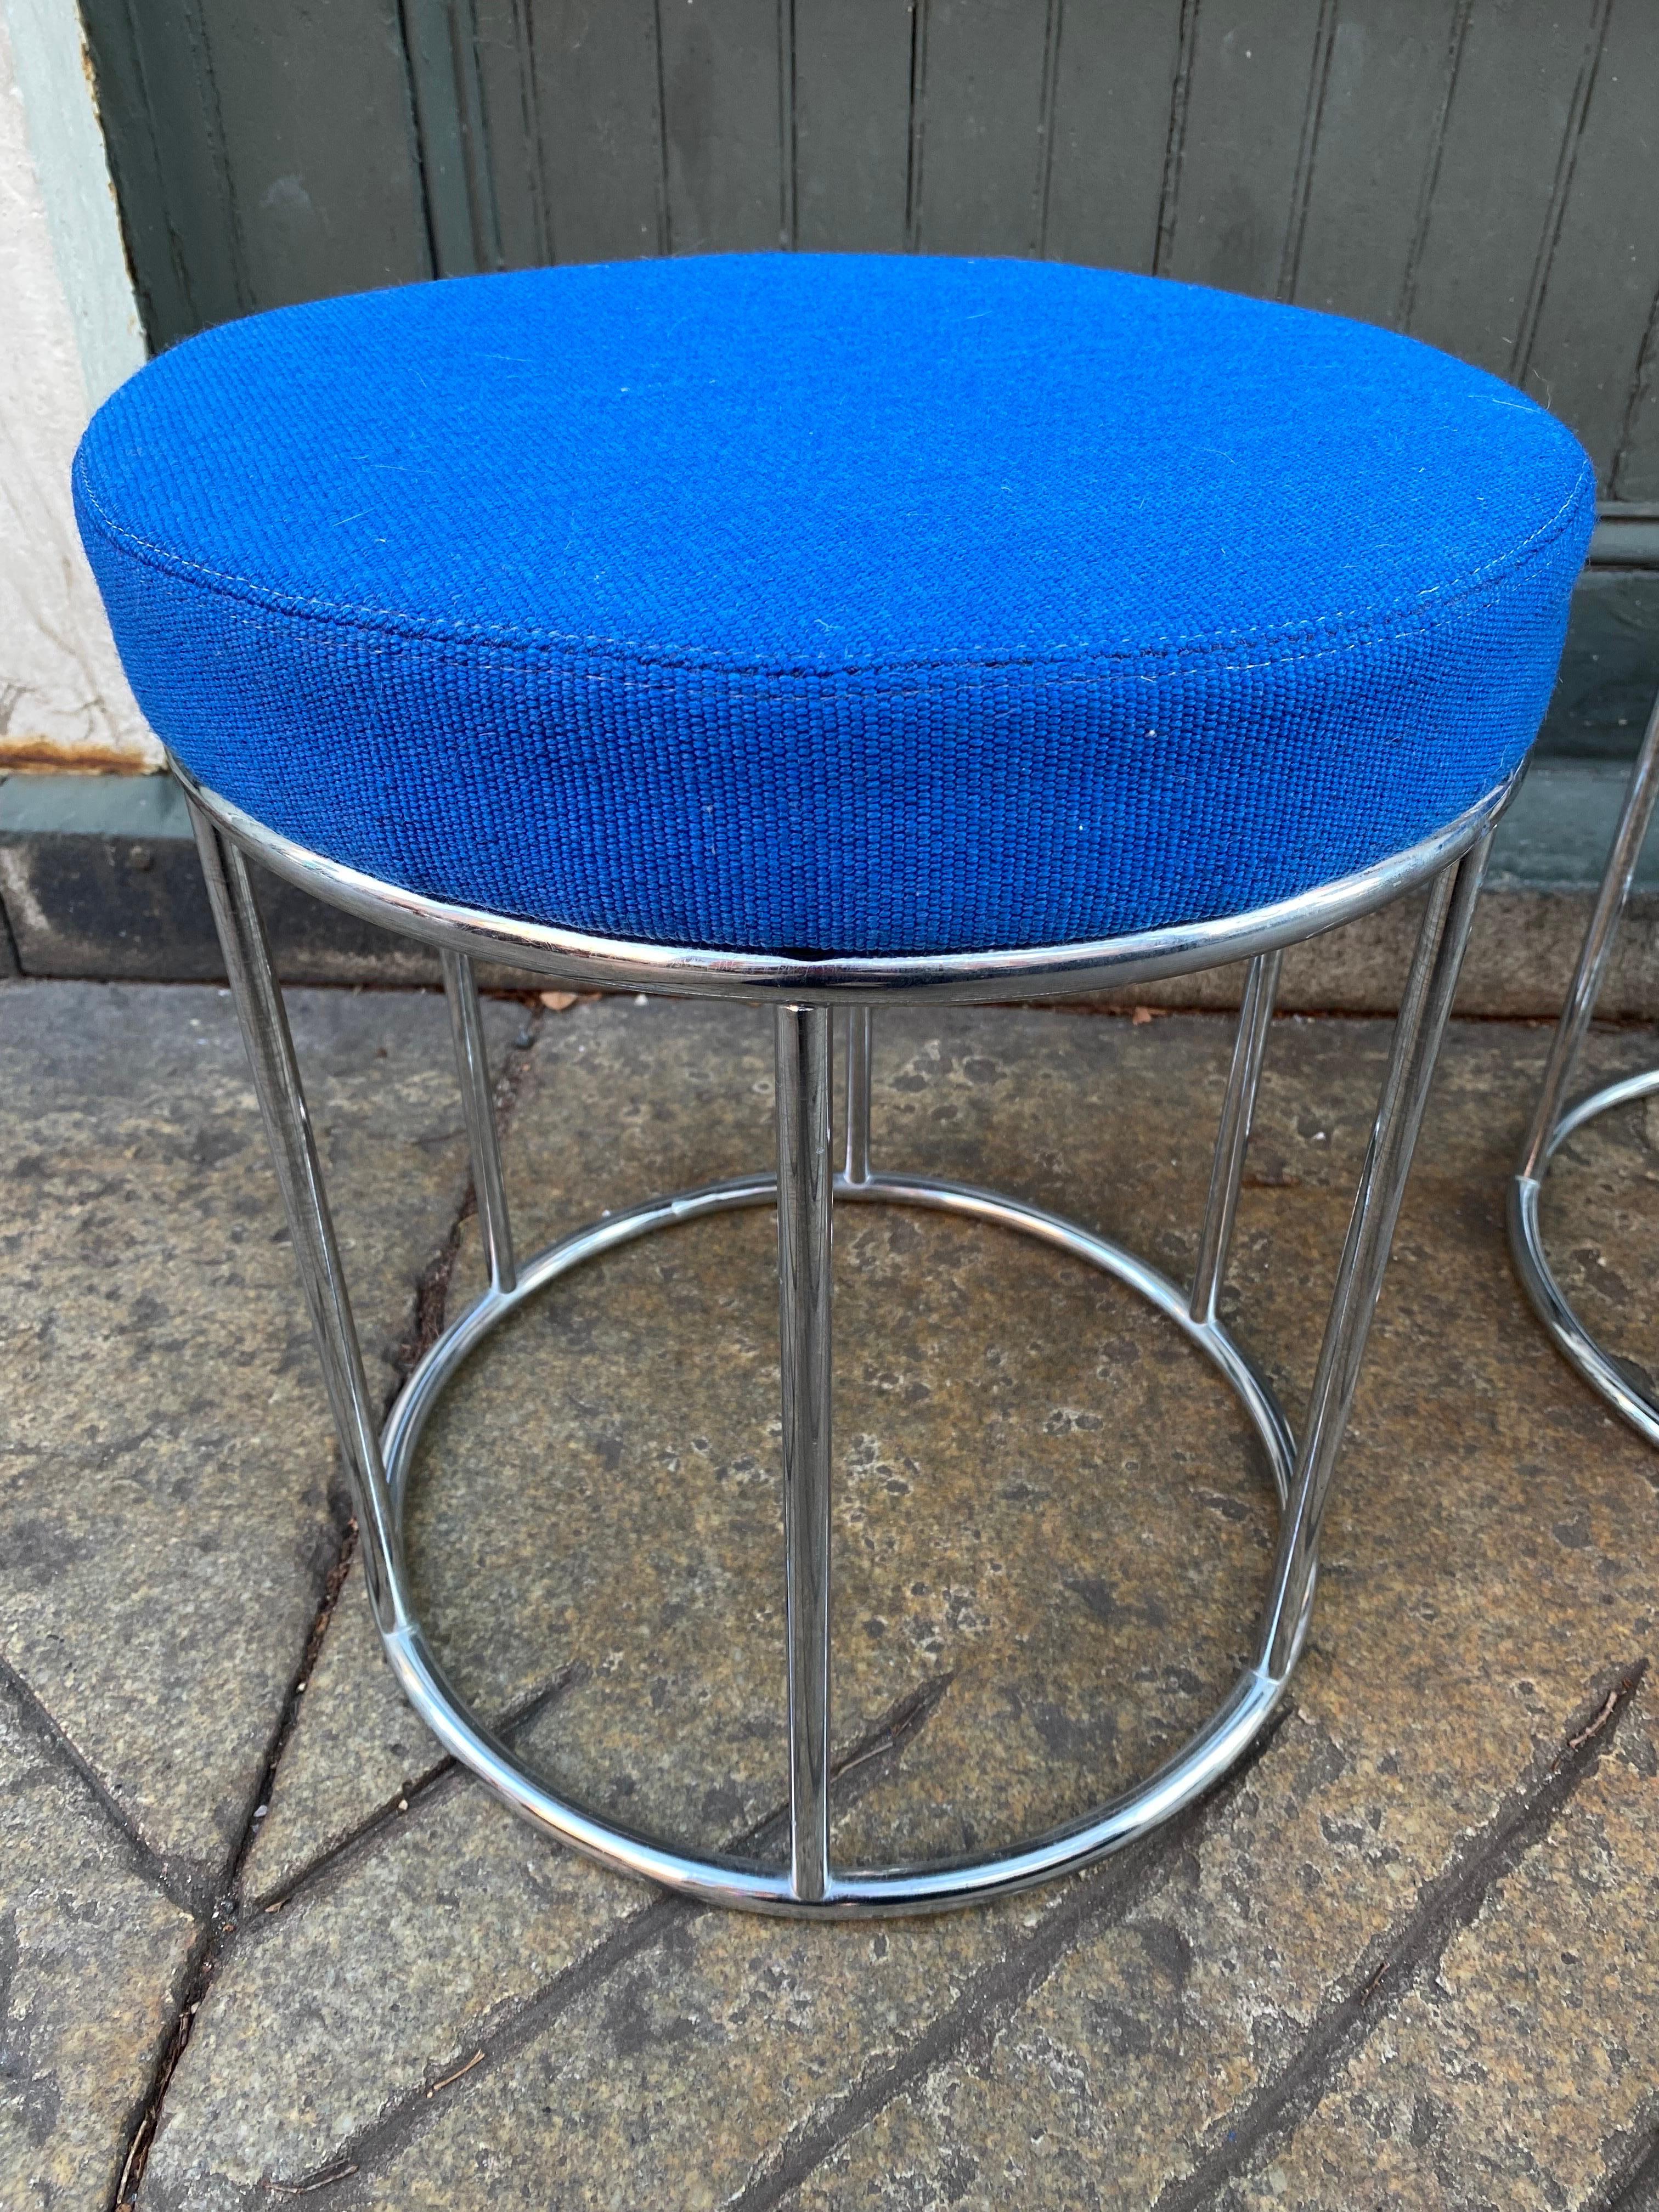 A pair of beautiful low stools with chrome frames and blue upholstered cushions manufactured in Columbus, Indiana by the Cosco Home Products company in the 1960s. Between 1955 and 1980s Columbus, Indiana was an important center of modern